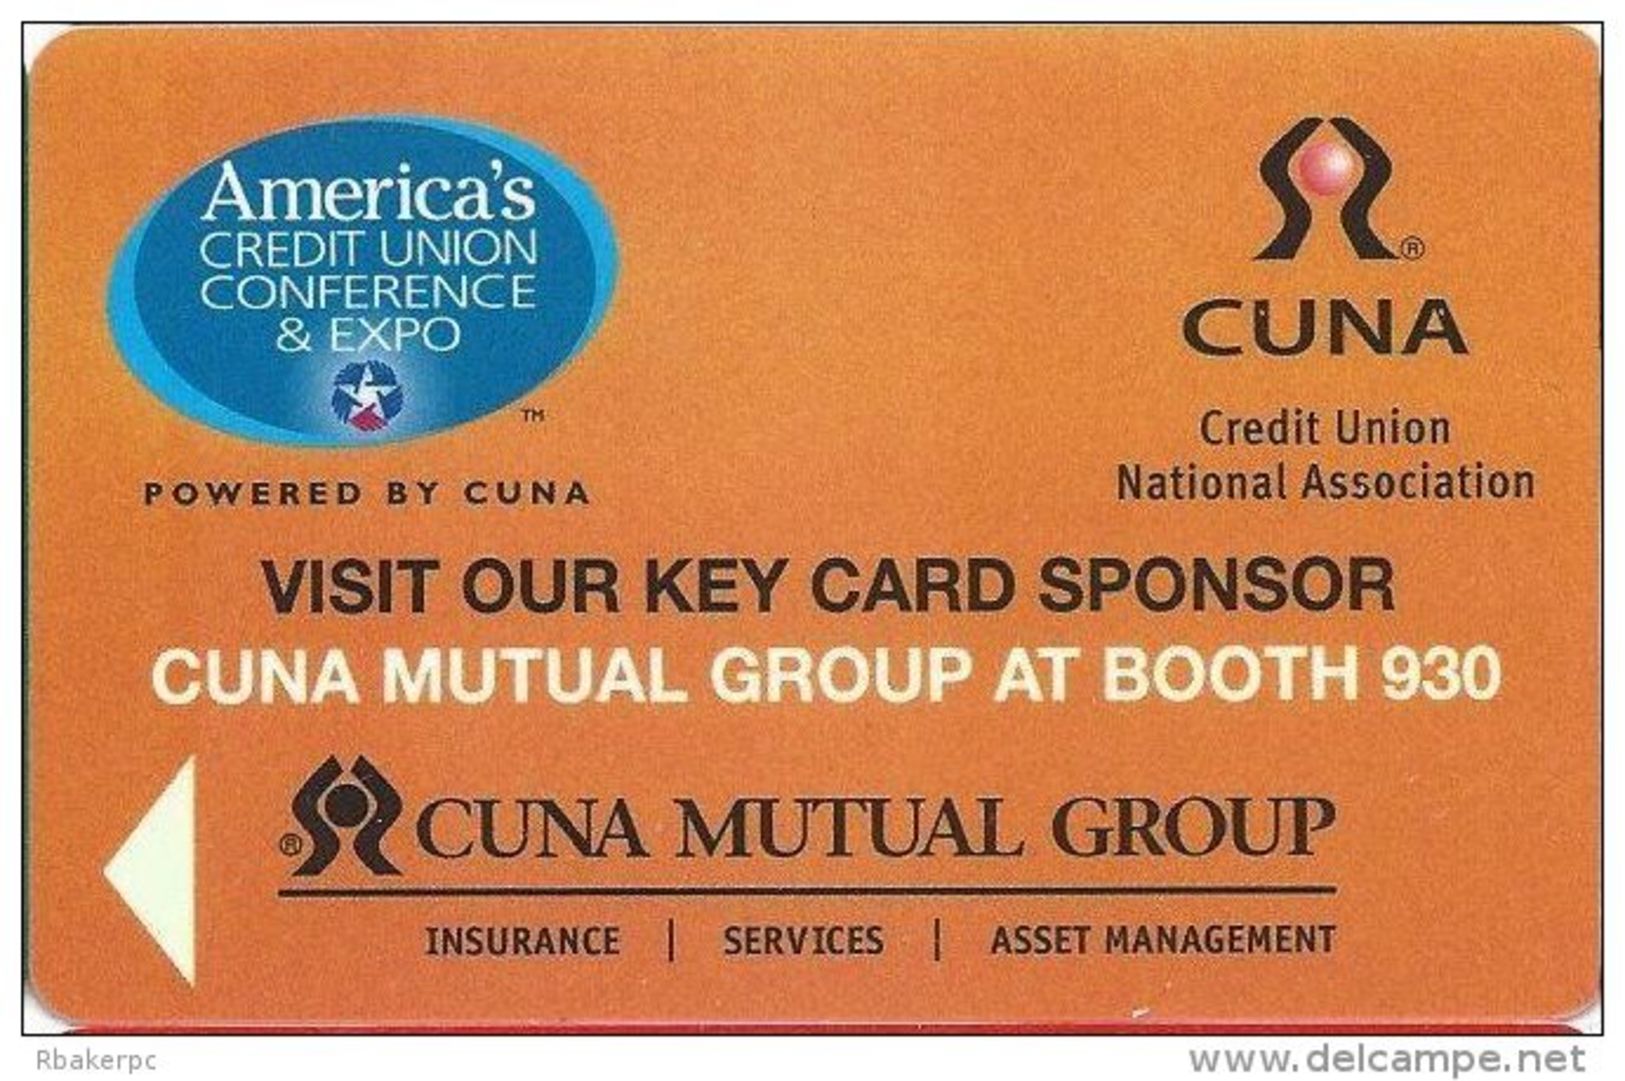 CUNA Mutual Group - Convention Advertising Hotel Room Key - Hotel Keycards